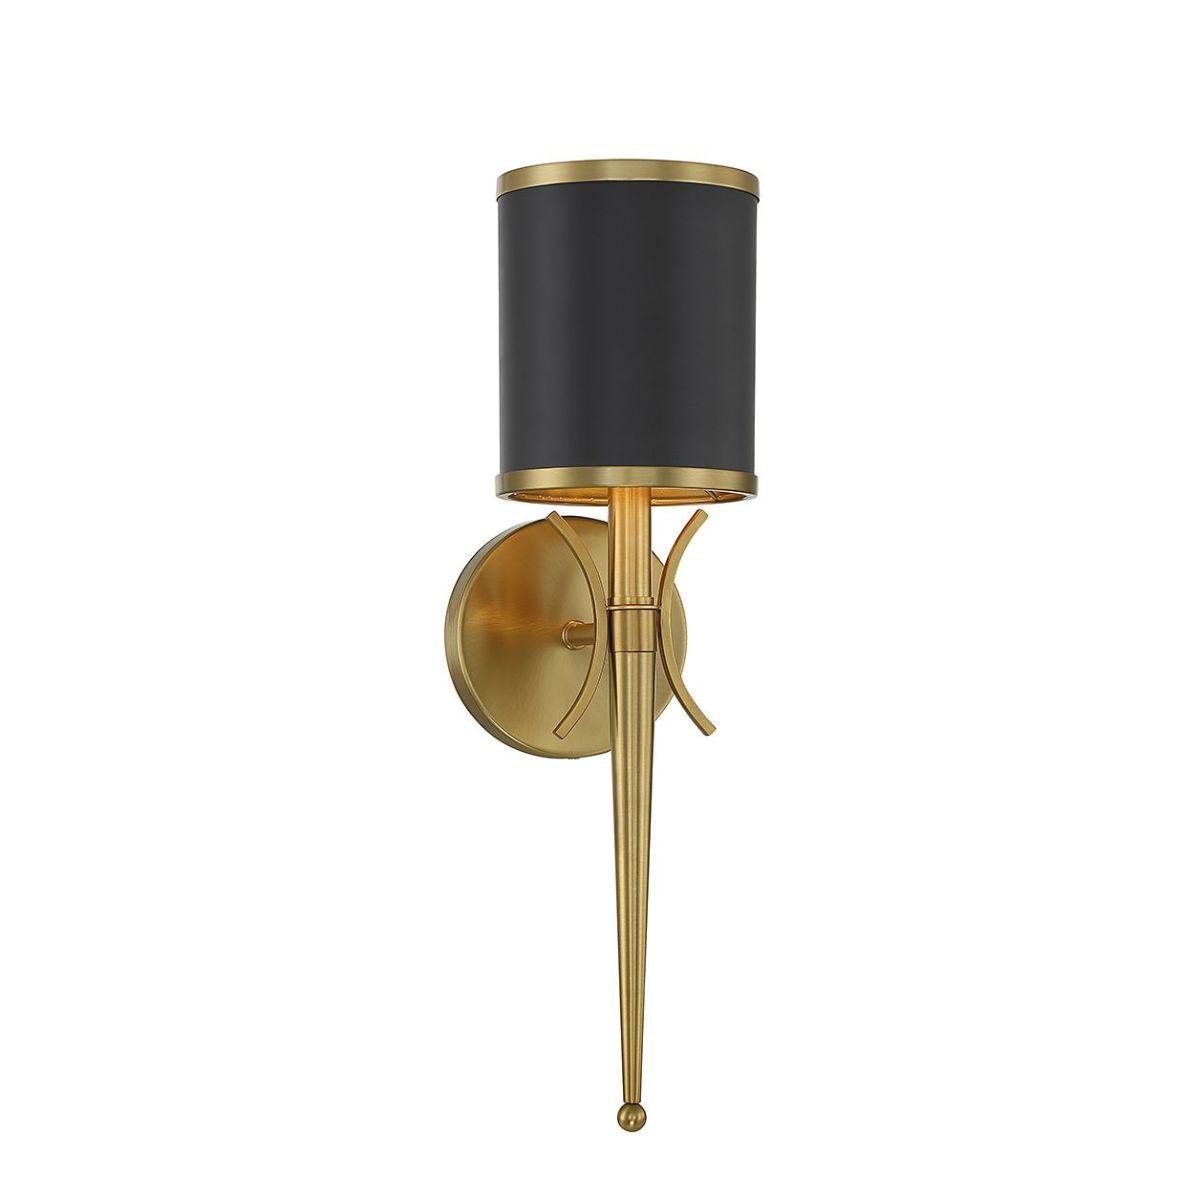 Quincy 19 in. Armed Sconce Matte Black & Brass Finish